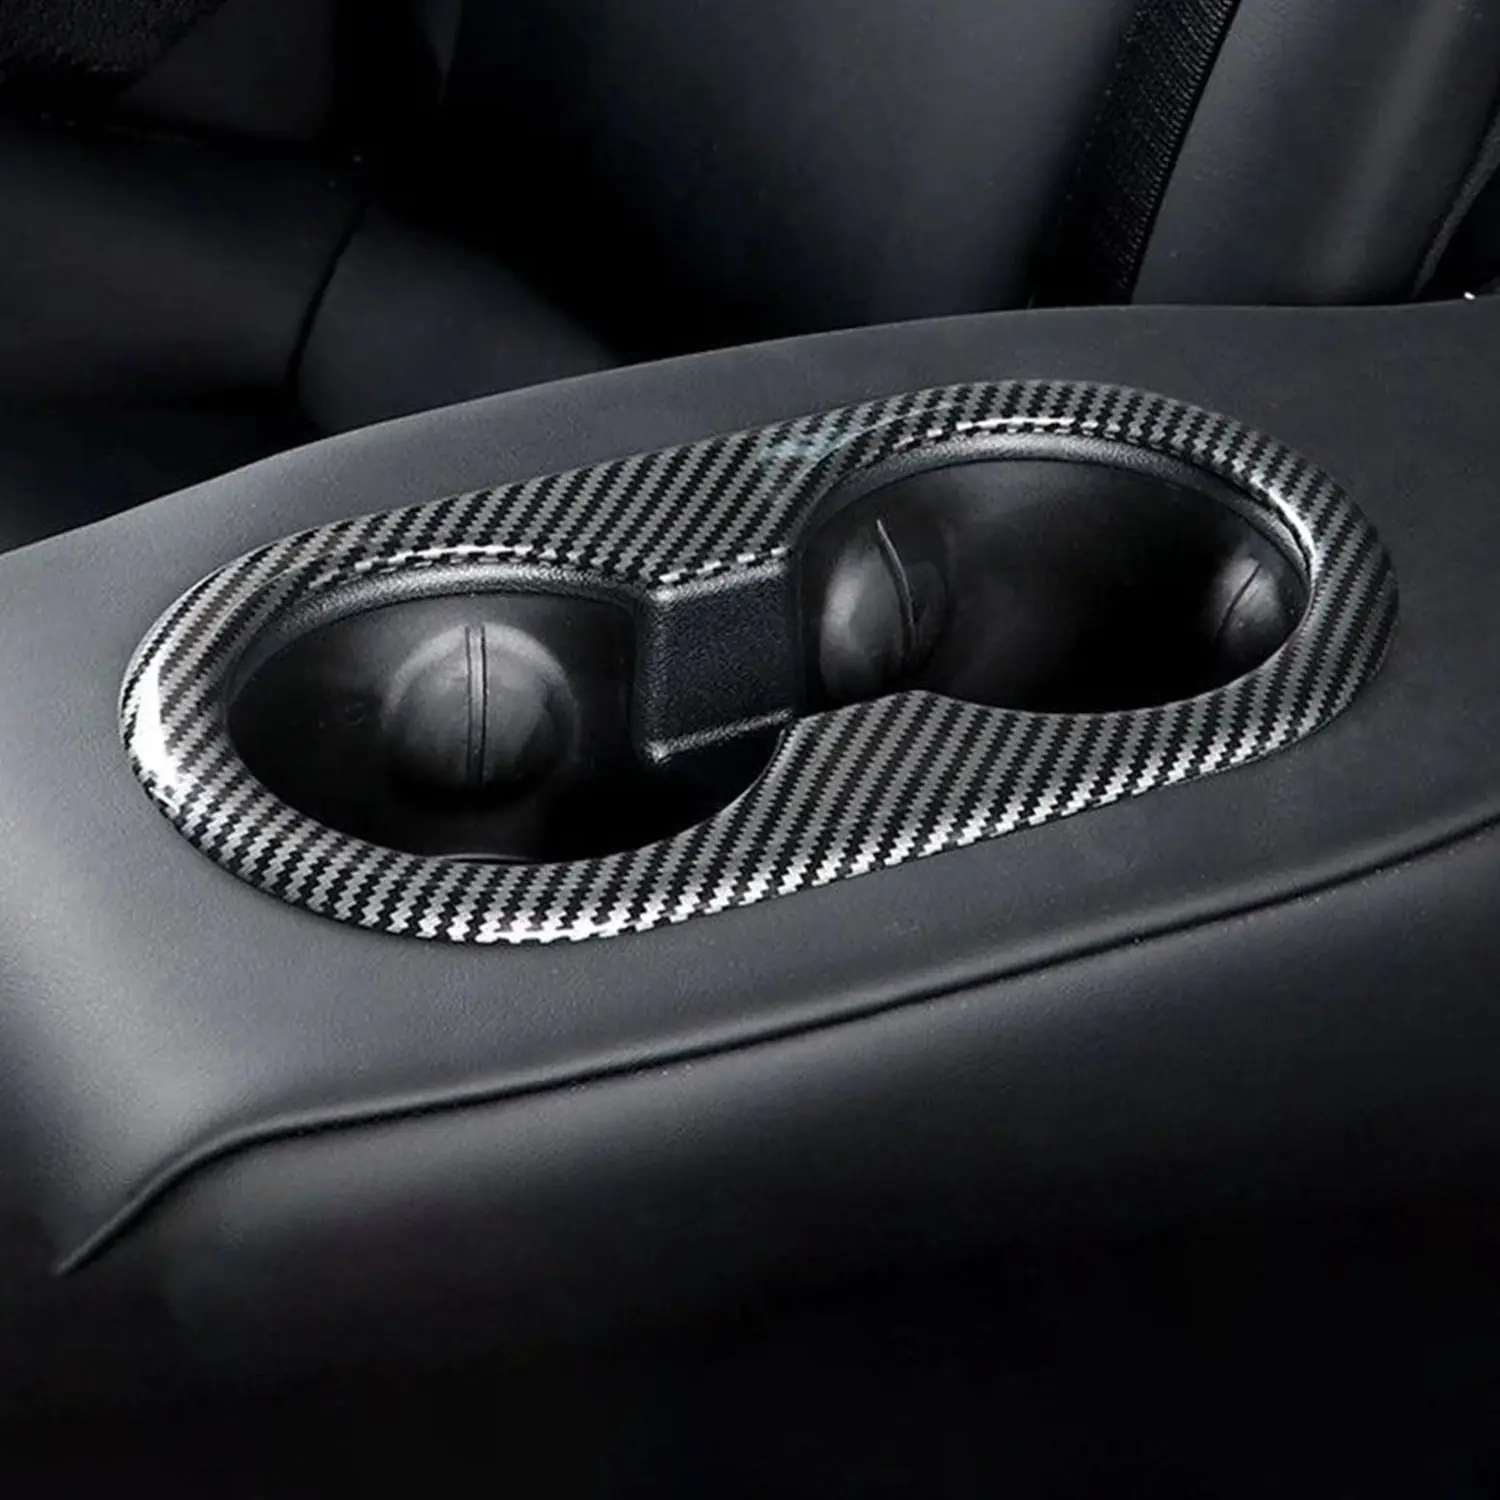 Enhance Your Tesla Model 3's Interior with Adreama's Premium Dry Carbon Fiber Rear Seat Cupholder Trim Cover